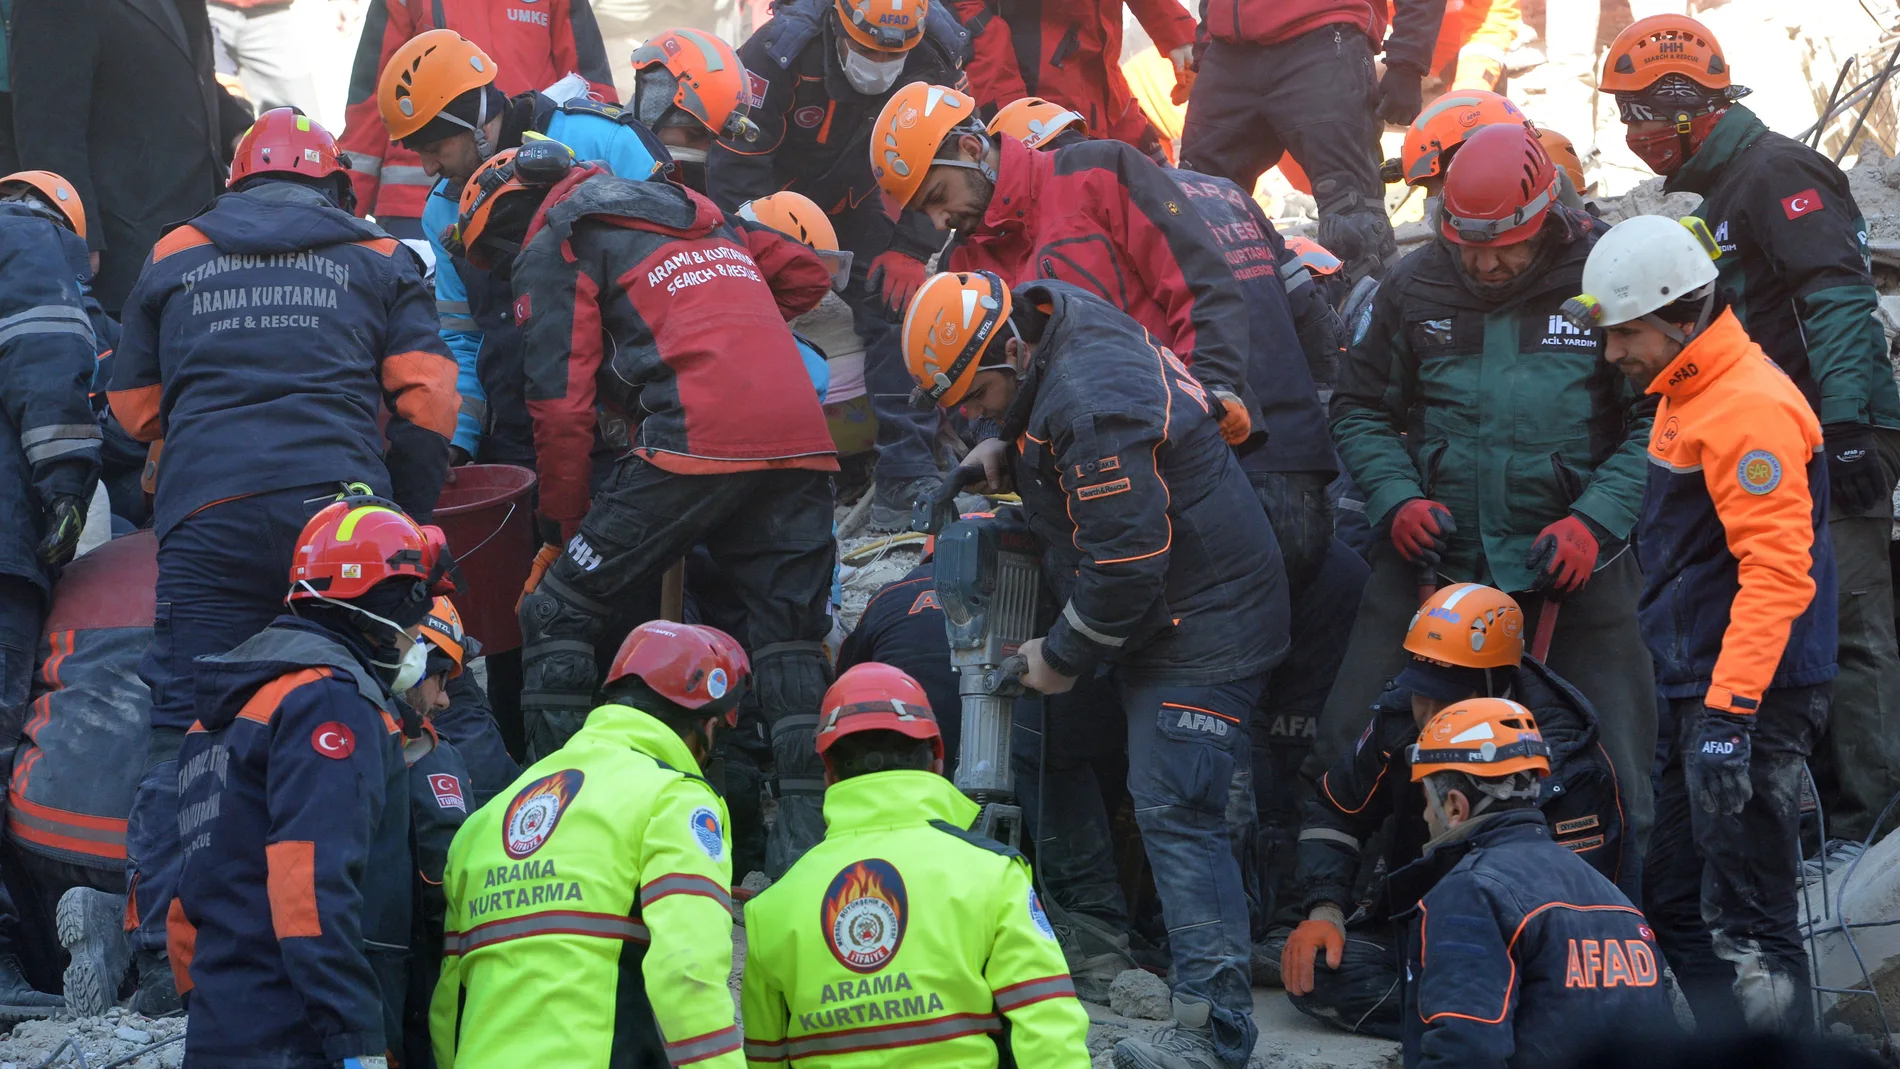 Elazig (Turkey), 25/01/2020.- Rescue workers search for survivors in the rubble of a building after an earthquake hit Elazig, Turkey, 25 January 2020. According to reports, at least twenty people have died and several are injured after 6.7 magnitude earthquake hit Turkey, also affecting parts of Syria, Georgia and Armenia. (Terremoto/sismo, Siria, Turquía) EFE/EPA/STR